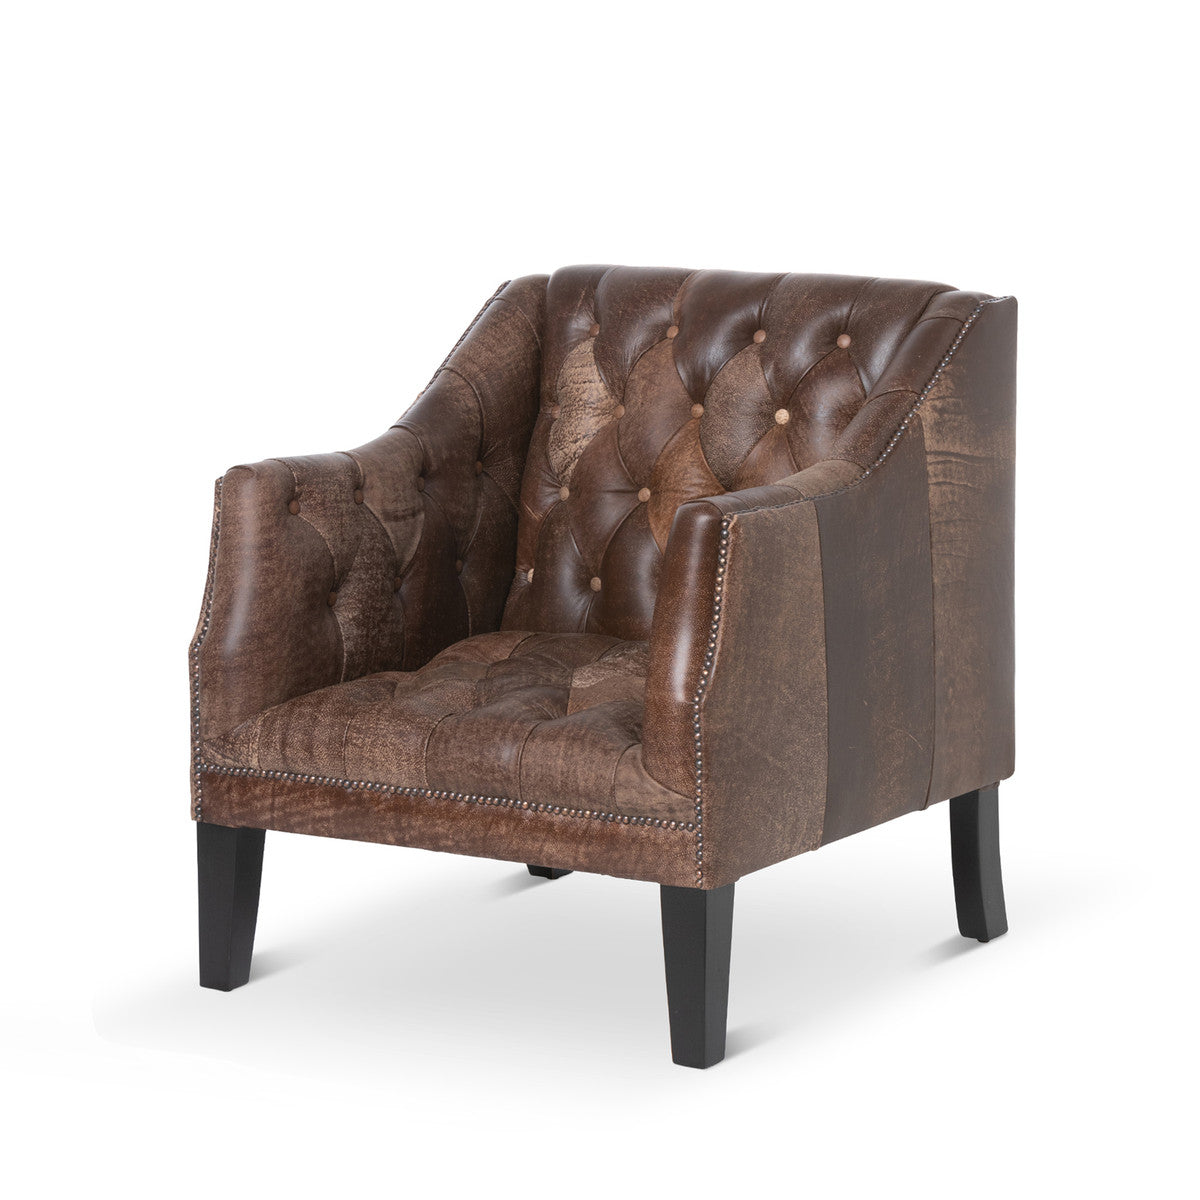 Brent Tufted Leather Club Chair, Vintage Umber